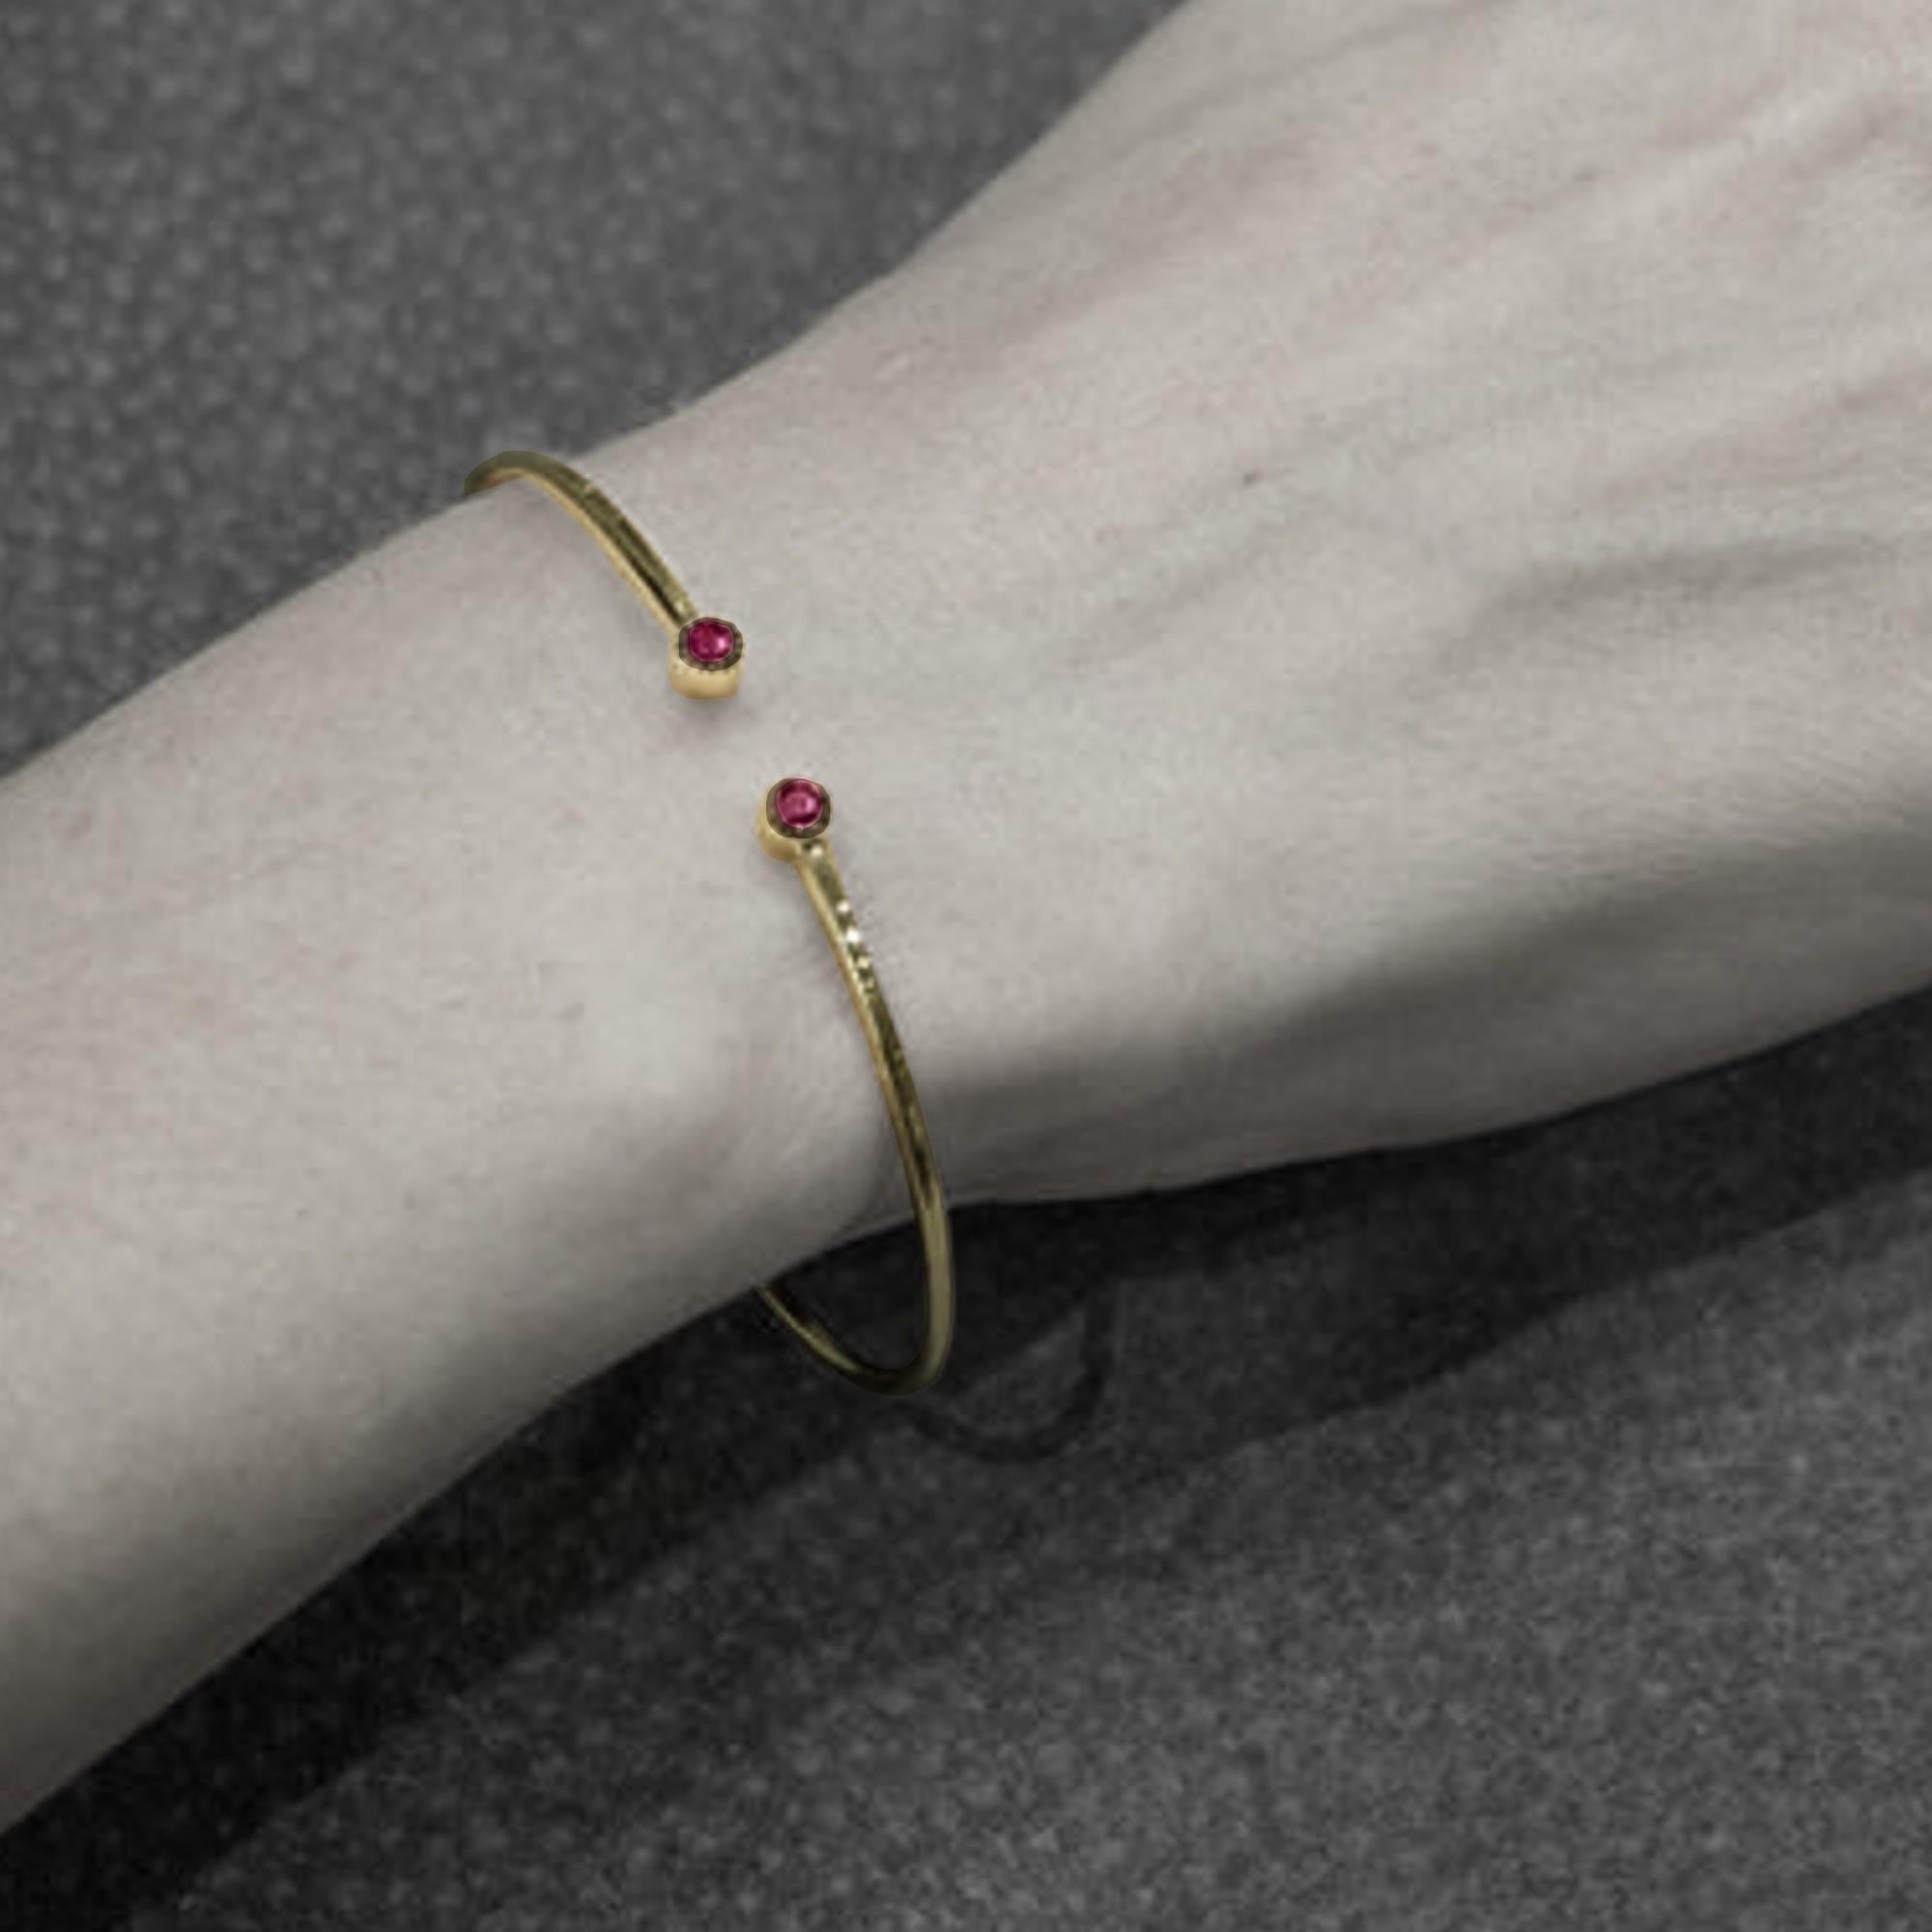 Alex Jona design collection, hand crafted in Italy, 18 karat yellow gold bangle bracelet set with two round cut natural rubies weighing in total 0.31 carats.
Dimensions: 
2.09 in. H x 2.32 in. W x 0.14 in. D
53 mm. H x 59 mm. W x 4 mm. D

Alex Jona